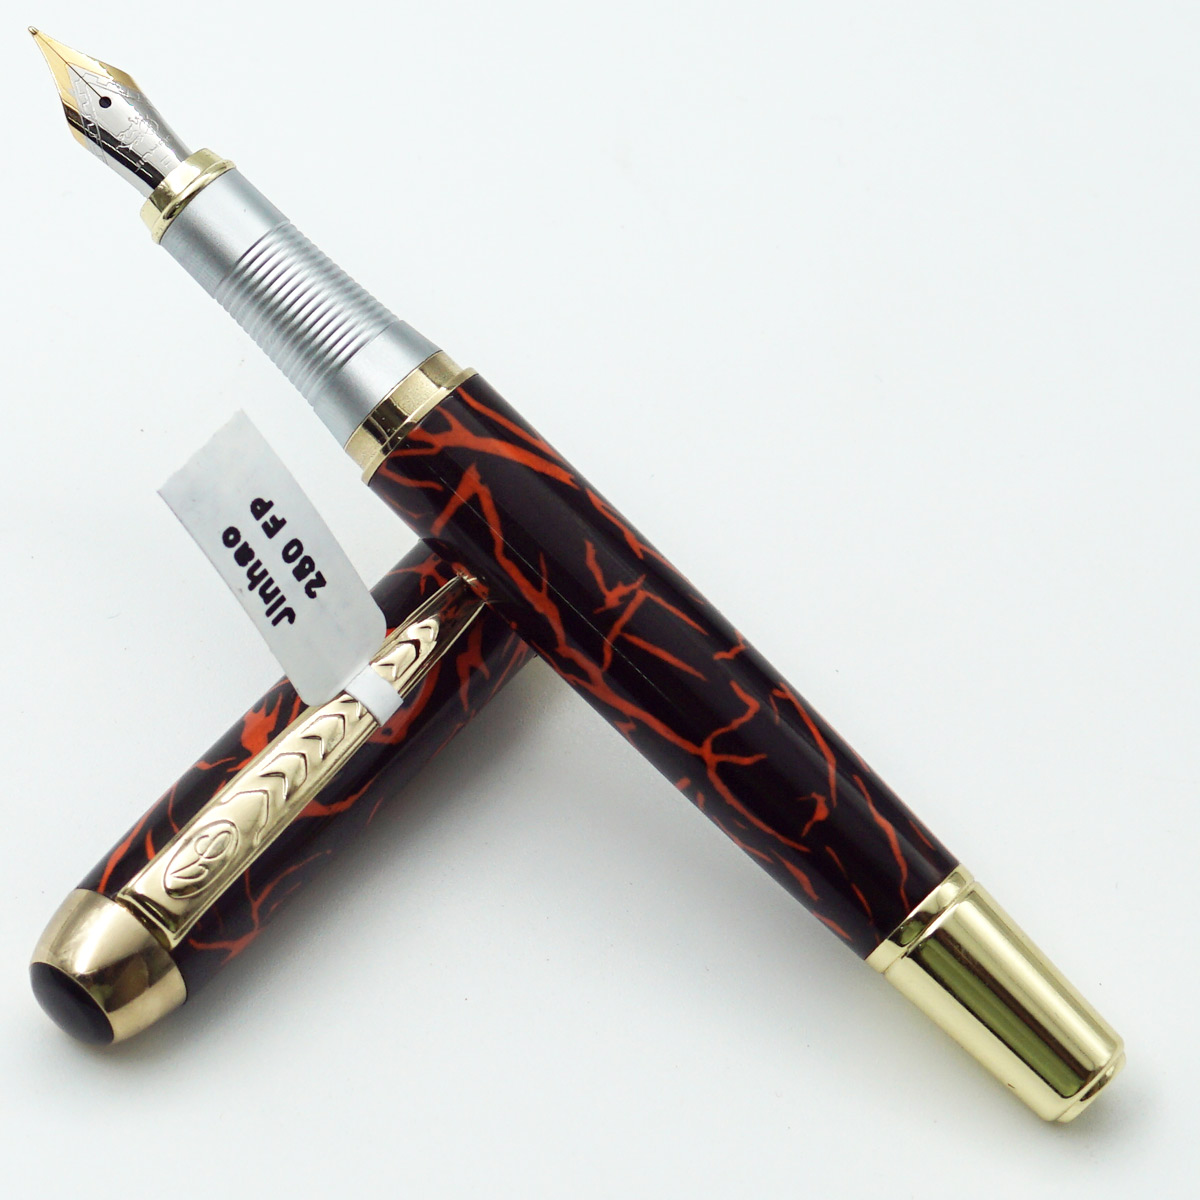 Jinhao 250 Glossy Orange With Black Marble Designed Body With 5.5 Fine Nib With Golden Designed Clip Converter Type Fountain Pen SKU 24532